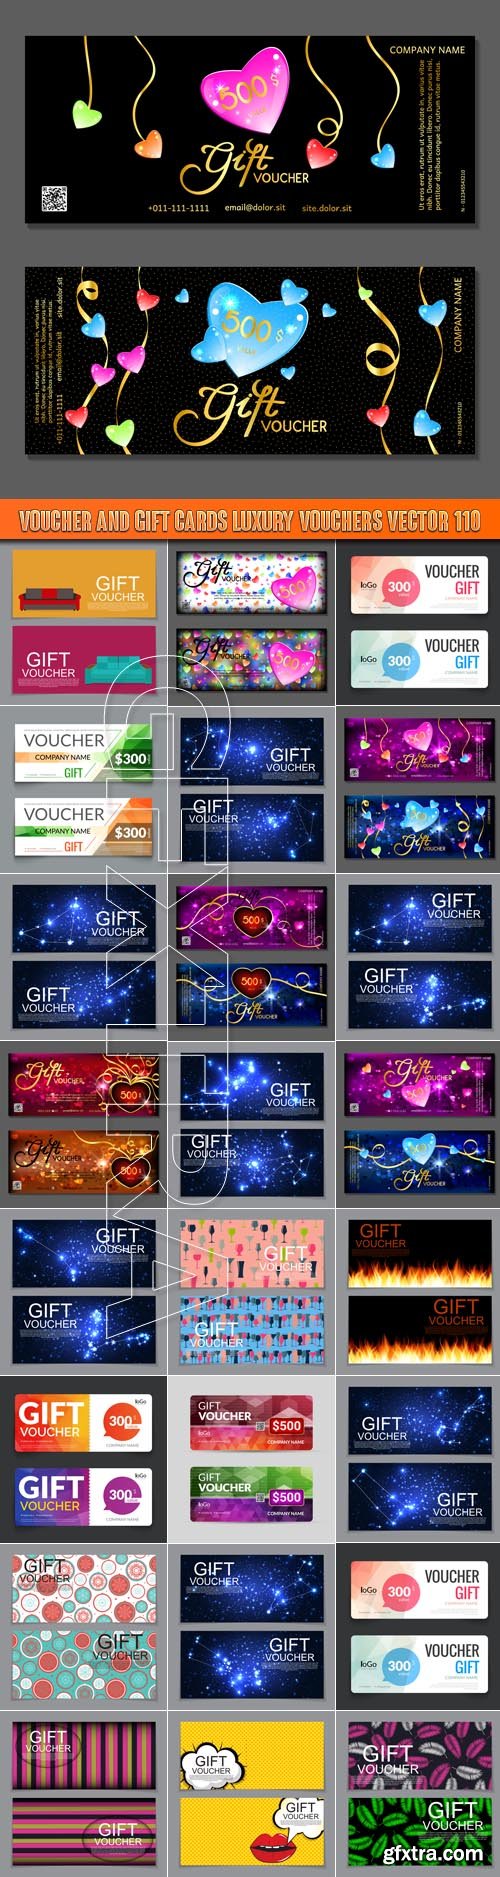 Voucher and gift cards luxury vouchers vector 110